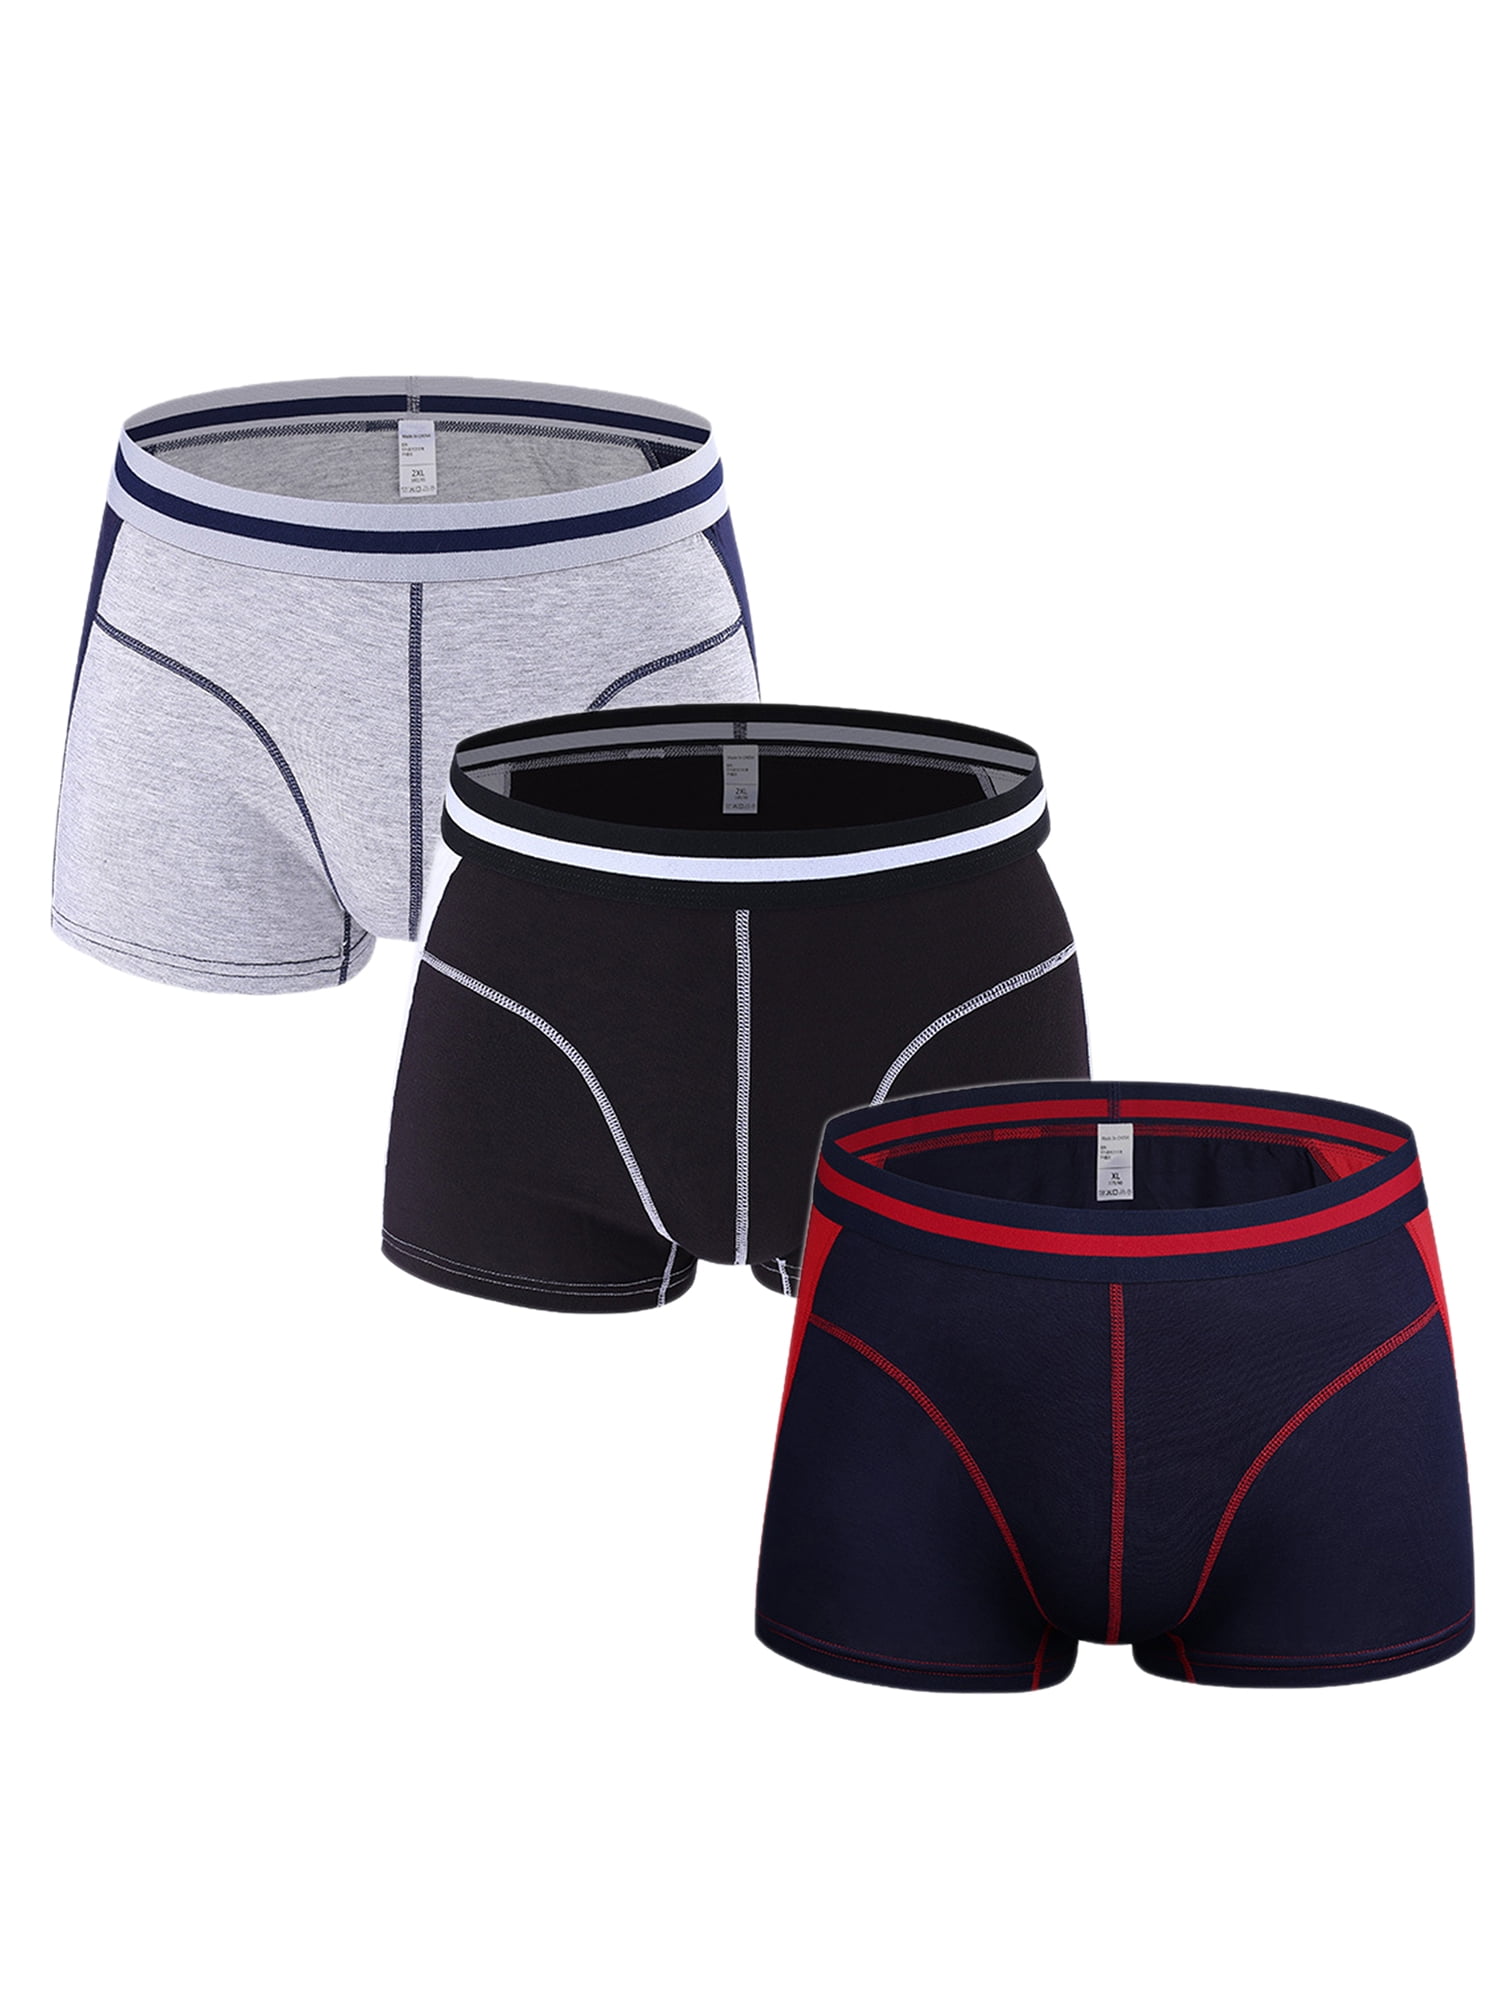 Mens No Ride up Boxer Briefs Stretch Comfortable Breathable Cotton Underwear with Pouch Fly